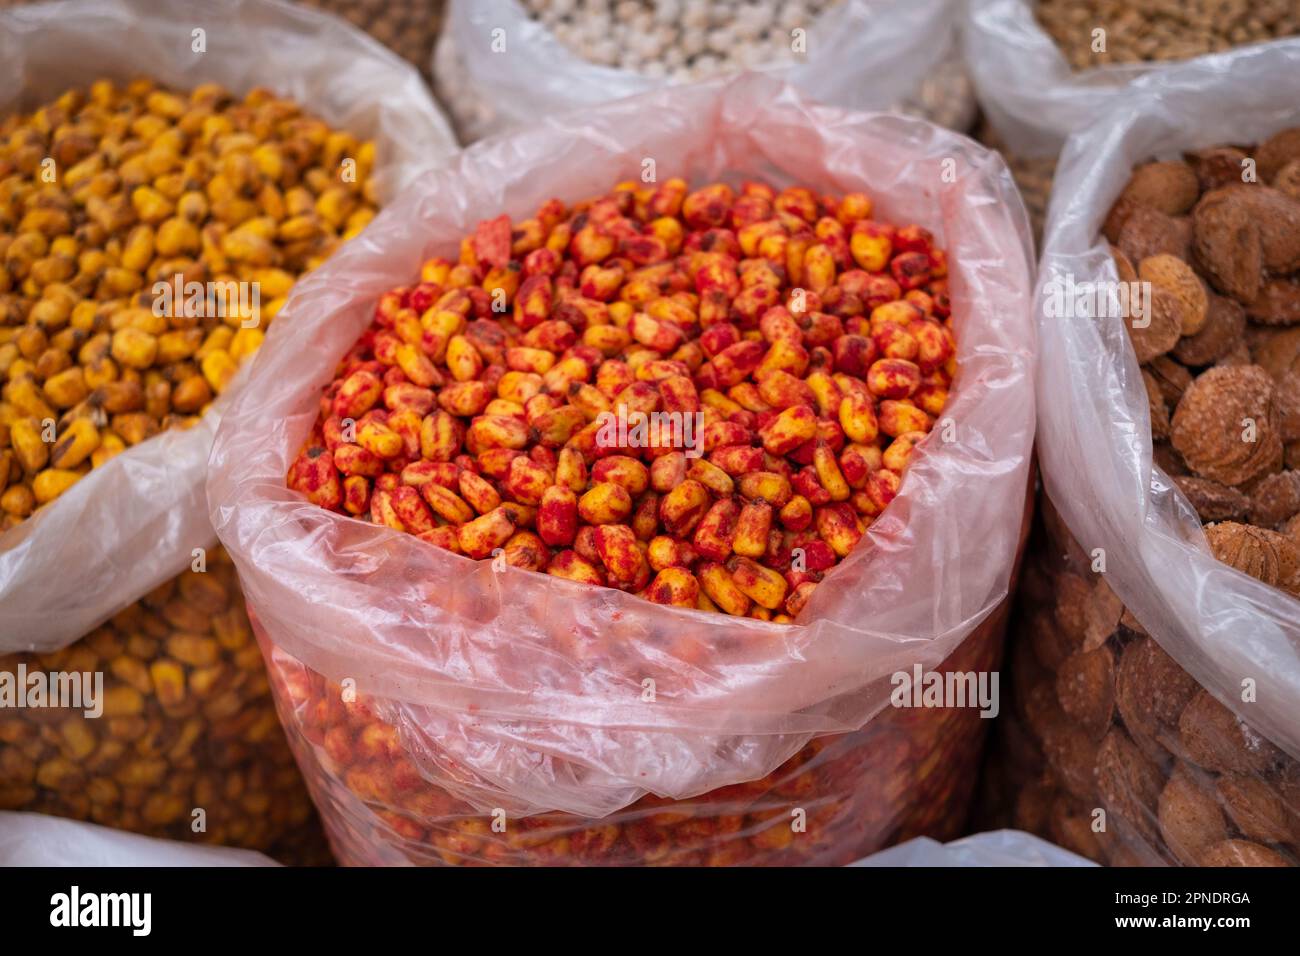 Corn seeds and nuts for sale on food market Stock Photo